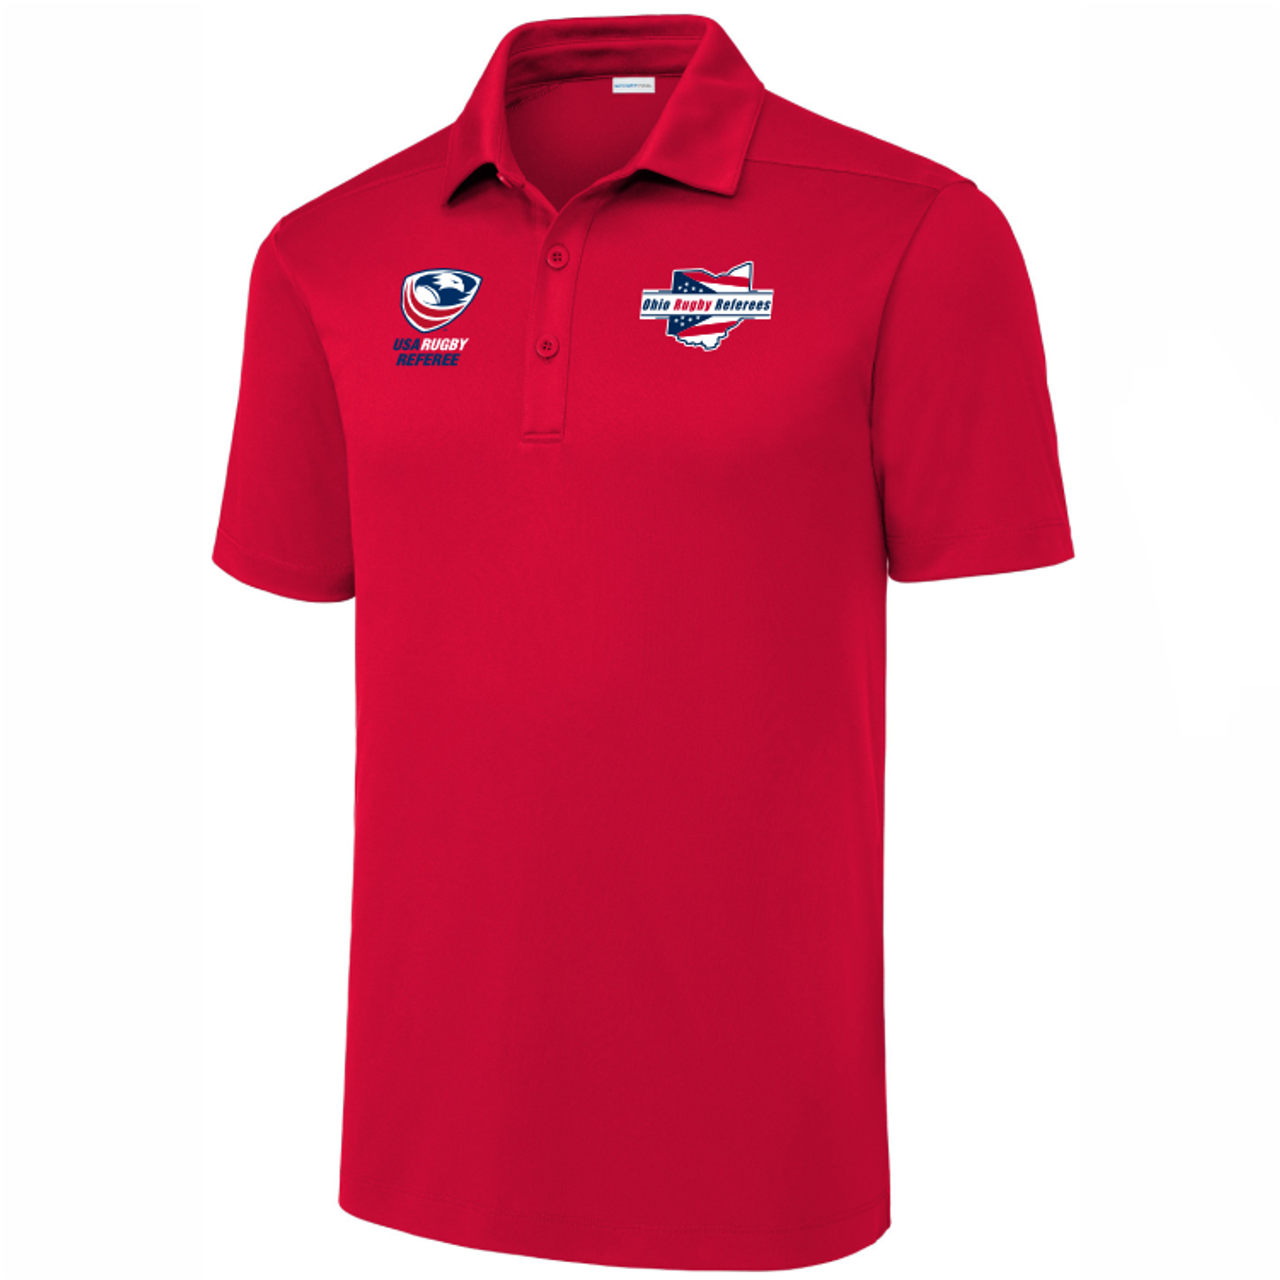 Ohio Rugby Referees Performance Polo, Red